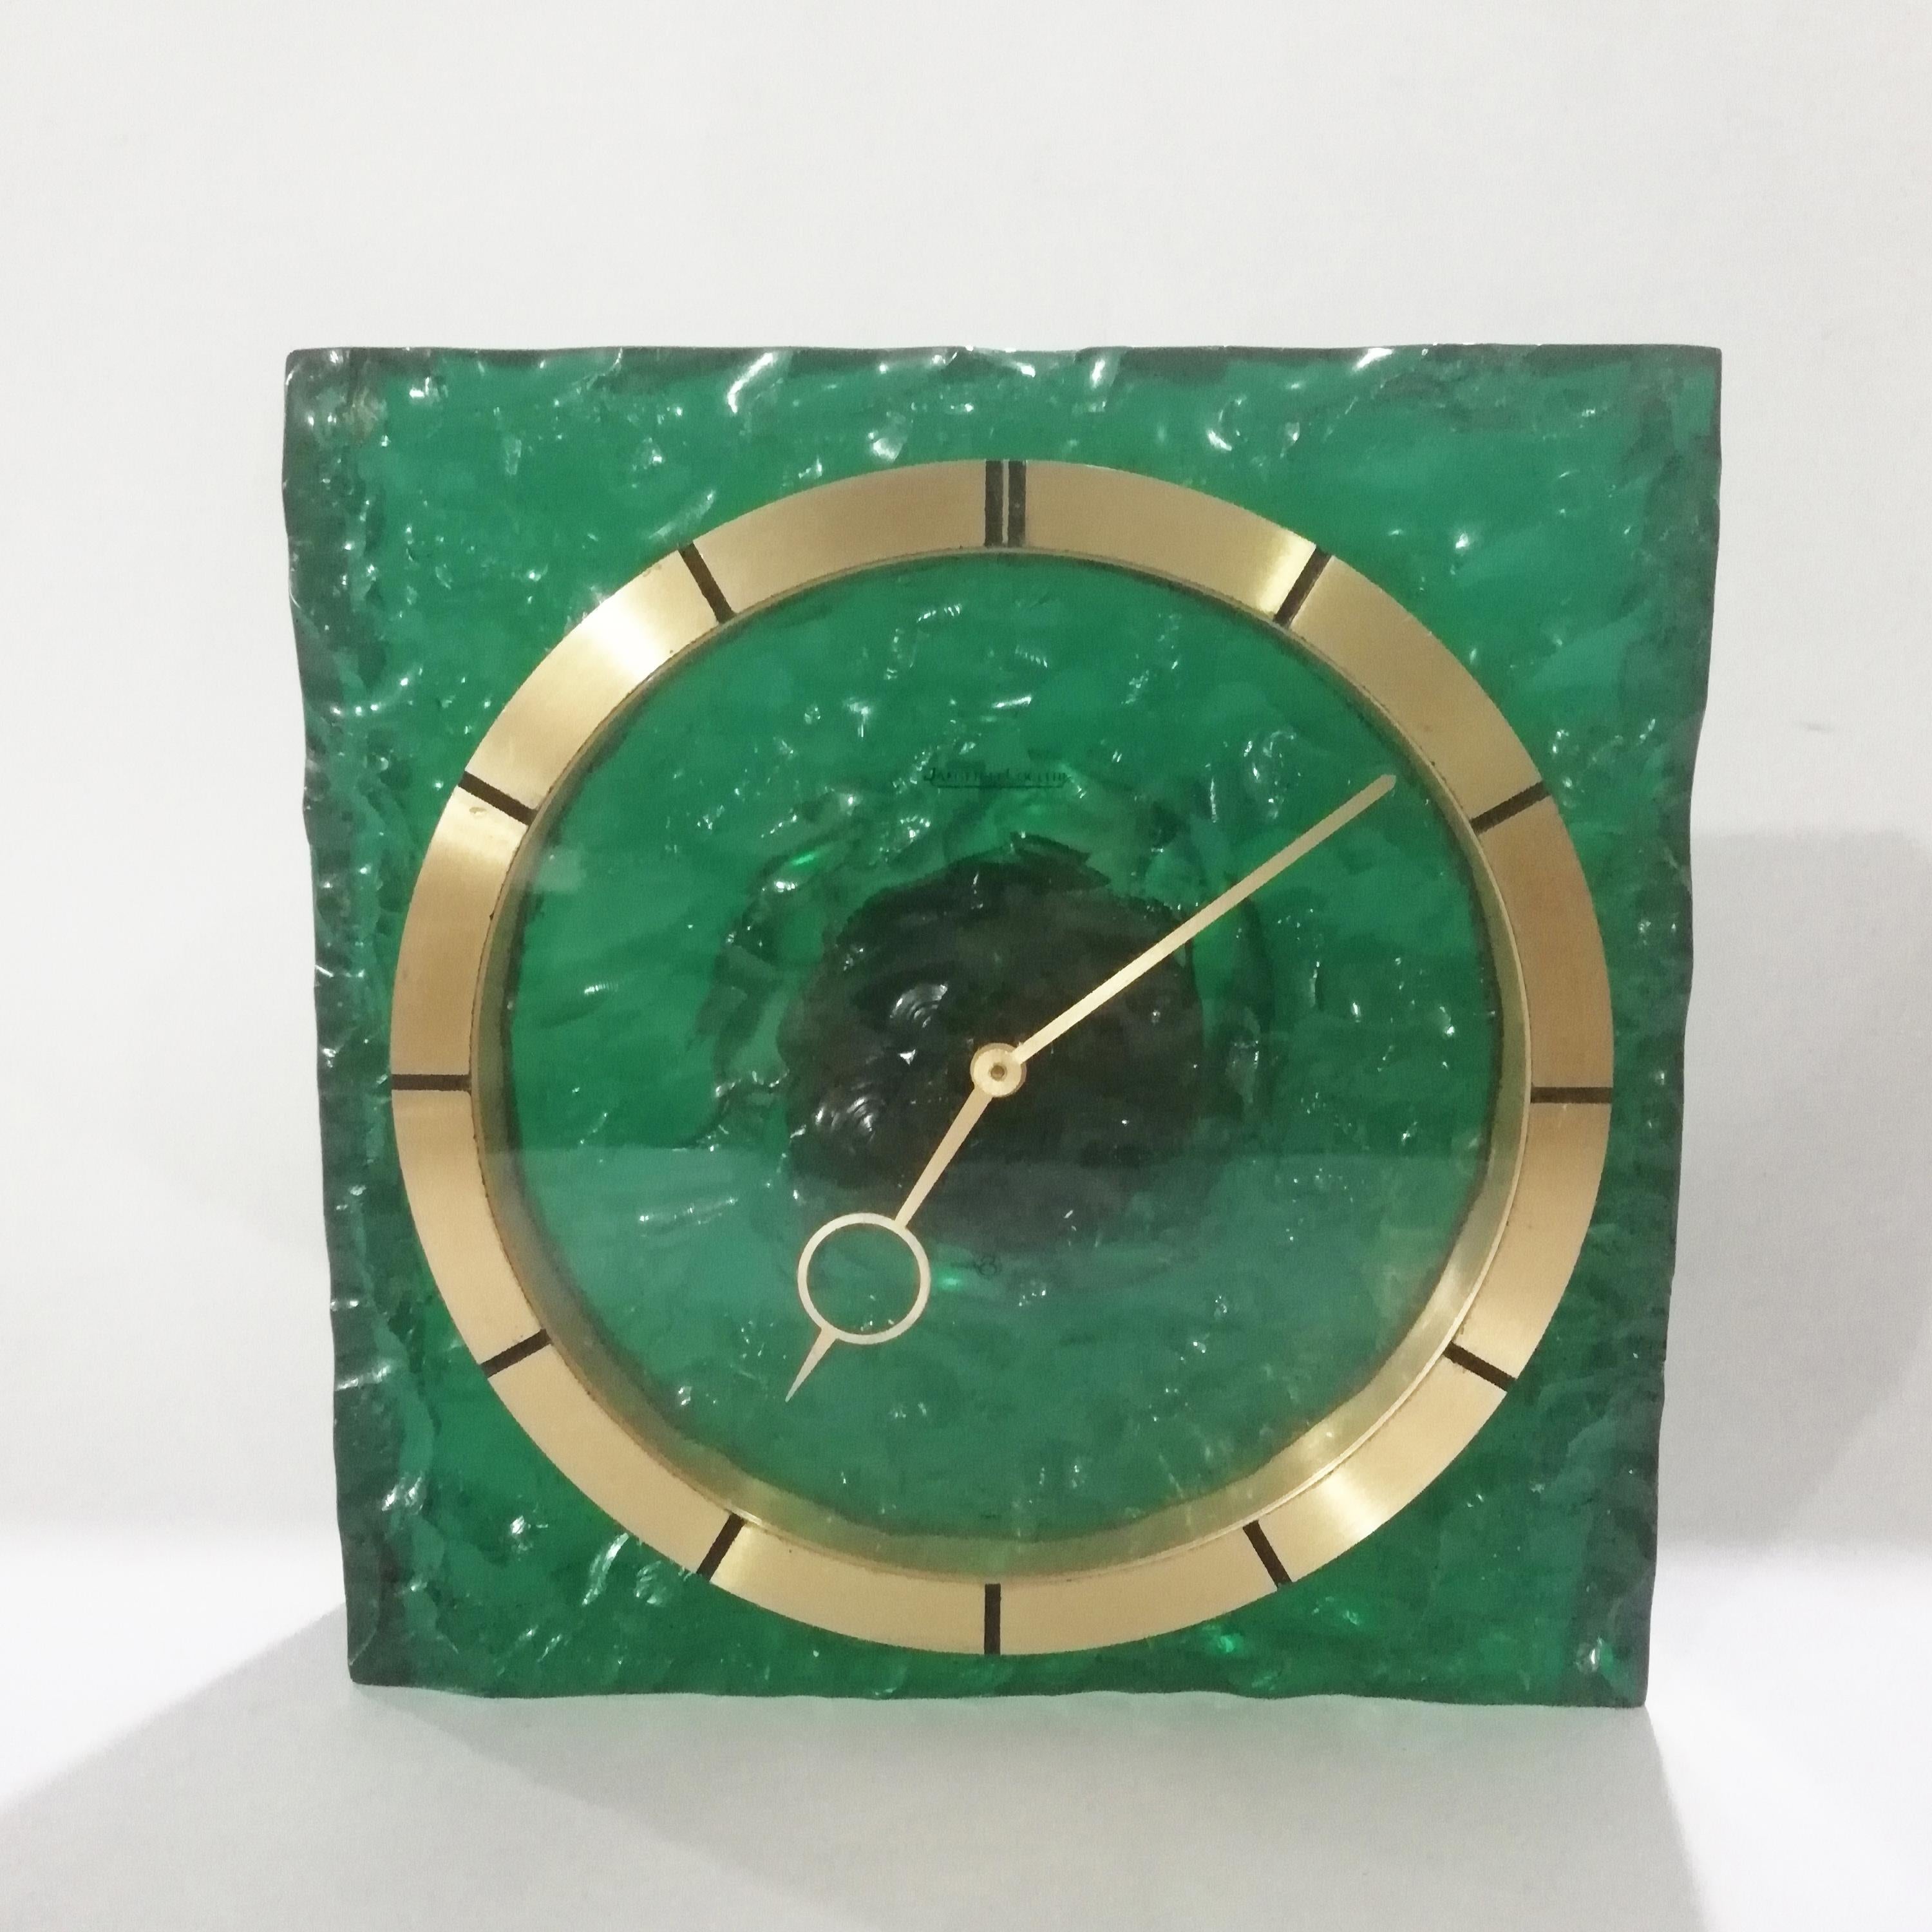 Rare Mid-Century Modern green resin and brass table clock by Swiss manufacturer Jaeger-LeCoultre. The green transparent resin case shows a stony texture. The brass bezel shows fluted indicators and an acrylic face. Baton brass hands. 50 milimeter